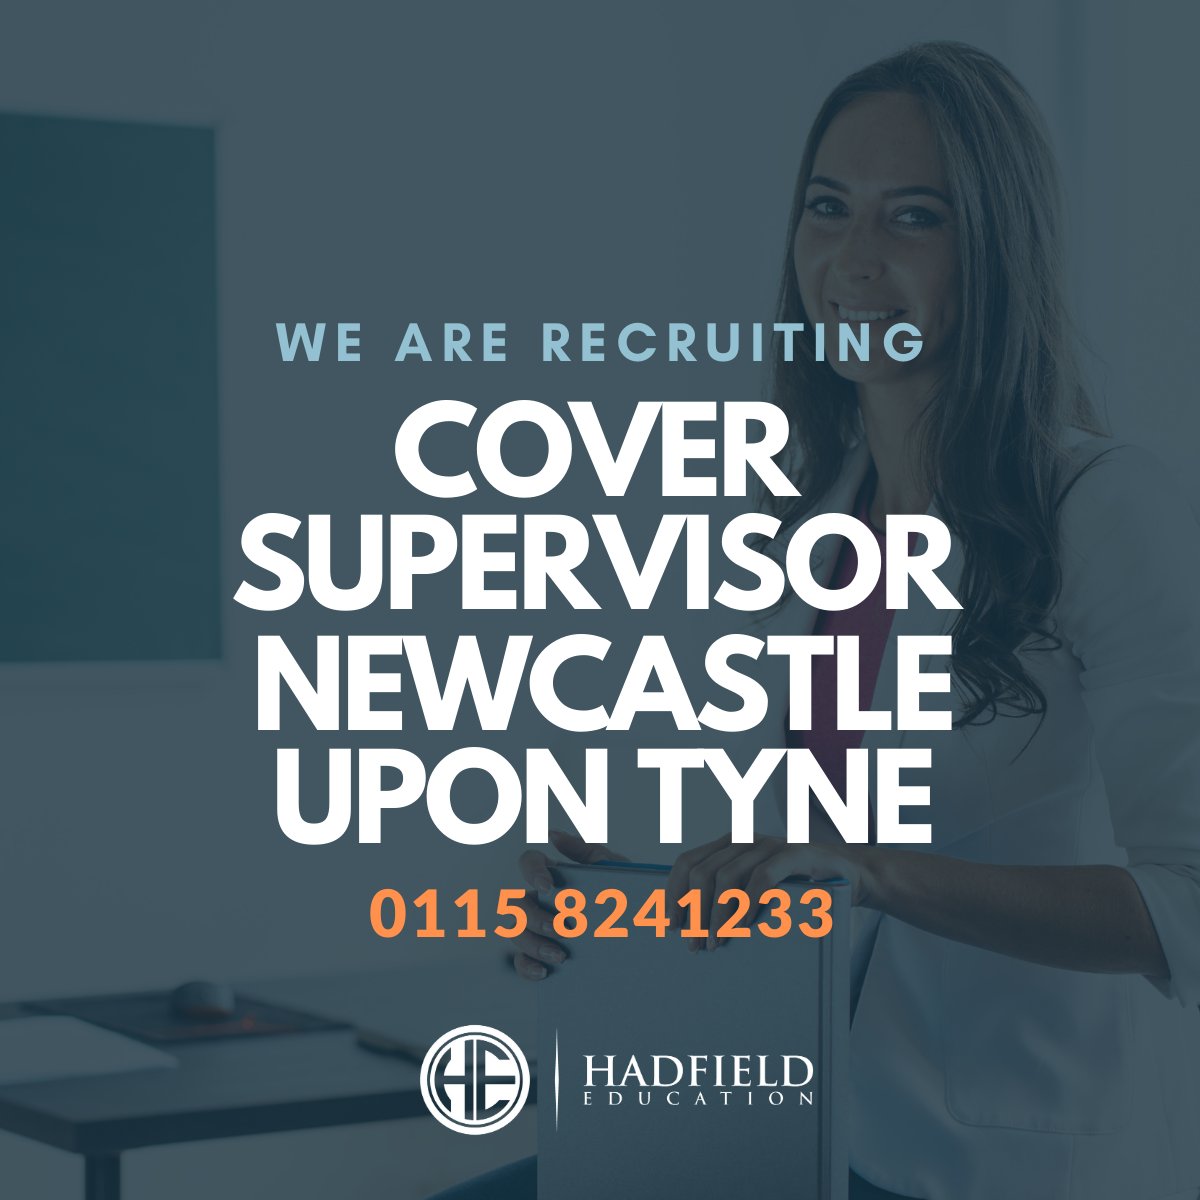 🌟 Fantastic opportunity! 🌟 We're looking for a Cover Supervisor in 📍Newcastle upon Tyne! 🎓 Join our team and make a difference! 💼 #NewcastleJobs #TeachingJobs #CoverSupervisorJobs 🚀 bit.ly/3OS5WYX